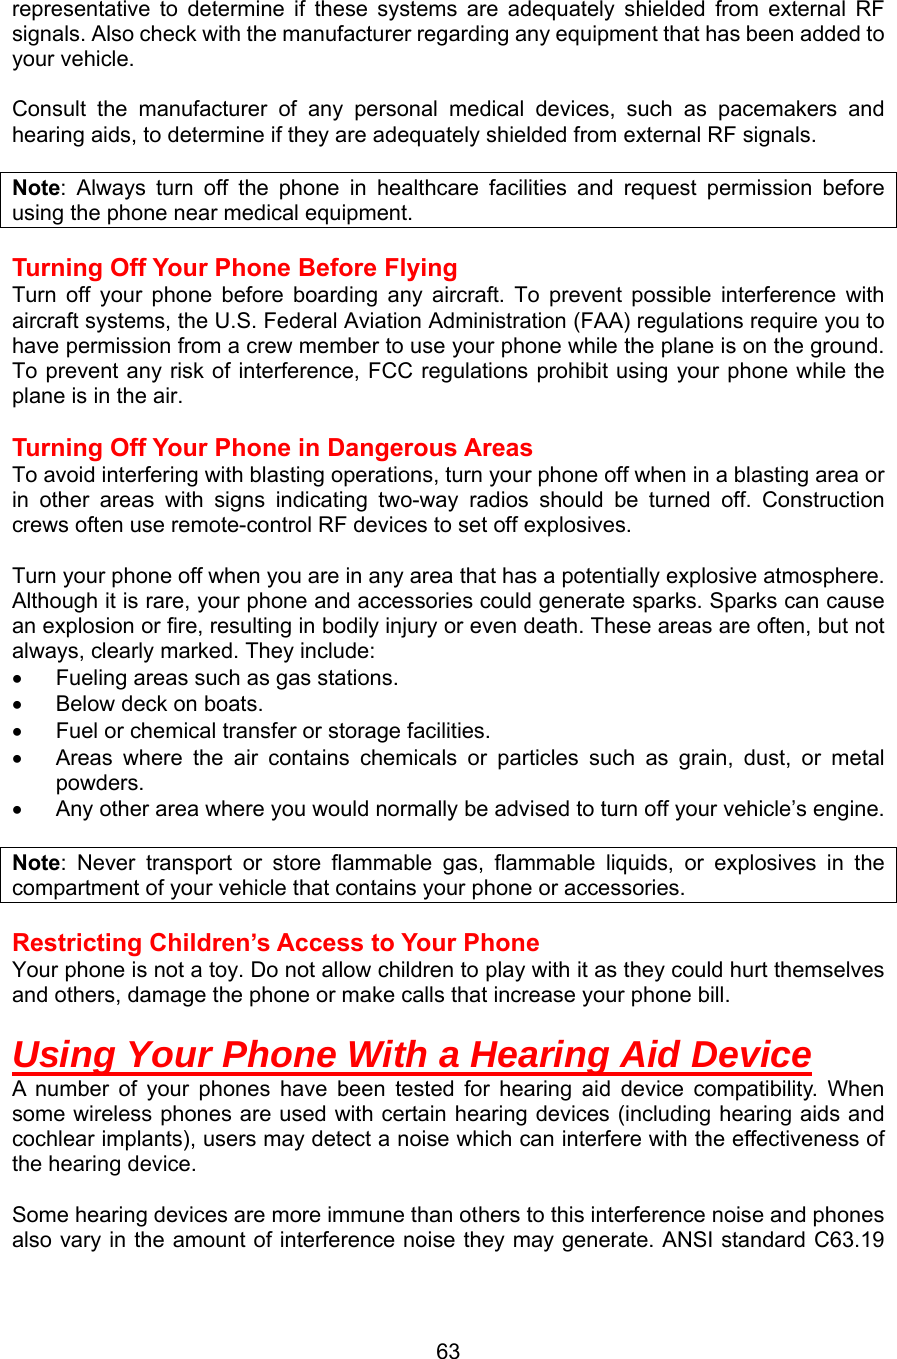 representative to determine if these systems are adequately shielded from external RF signals. Also check with the manufacturer regarding any equipment that has been added to your vehicle.    Consult the manufacturer of any personal medical devices, such as pacemakers and hearing aids, to determine if they are adequately shielded from external RF signals.  Note: Always turn off the phone in healthcare facilities and request permission before using the phone near medical equipment.  Turning Off Your Phone Before Flying Turn off your phone before boarding any aircraft. To prevent possible interference with aircraft systems, the U.S. Federal Aviation Administration (FAA) regulations require you to have permission from a crew member to use your phone while the plane is on the ground. To prevent any risk of interference, FCC regulations prohibit using your phone while the plane is in the air.  Turning Off Your Phone in Dangerous Areas To avoid interfering with blasting operations, turn your phone off when in a blasting area or in other areas with signs indicating two-way radios should be turned off. Construction crews often use remote-control RF devices to set off explosives.  Turn your phone off when you are in any area that has a potentially explosive atmosphere. Although it is rare, your phone and accessories could generate sparks. Sparks can cause an explosion or fire, resulting in bodily injury or even death. These areas are often, but not always, clearly marked. They include: •  Fueling areas such as gas stations. •  Below deck on boats. •  Fuel or chemical transfer or storage facilities. •  Areas where the air contains chemicals or particles such as grain, dust, or metal powders. •  Any other area where you would normally be advised to turn off your vehicle’s engine.  Note: Never transport or store flammable gas, flammable liquids, or explosives in the compartment of your vehicle that contains your phone or accessories.  Restricting Children’s Access to Your Phone Your phone is not a toy. Do not allow children to play with it as they could hurt themselves and others, damage the phone or make calls that increase your phone bill.   Using Your Phone With a Hearing Aid Device A number of your phones have been tested for hearing aid device compatibility. When some wireless phones are used with certain hearing devices (including hearing aids and cochlear implants), users may detect a noise which can interfere with the effectiveness of the hearing device.  Some hearing devices are more immune than others to this interference noise and phones also vary in the amount of interference noise they may generate. ANSI standard C63.19  63